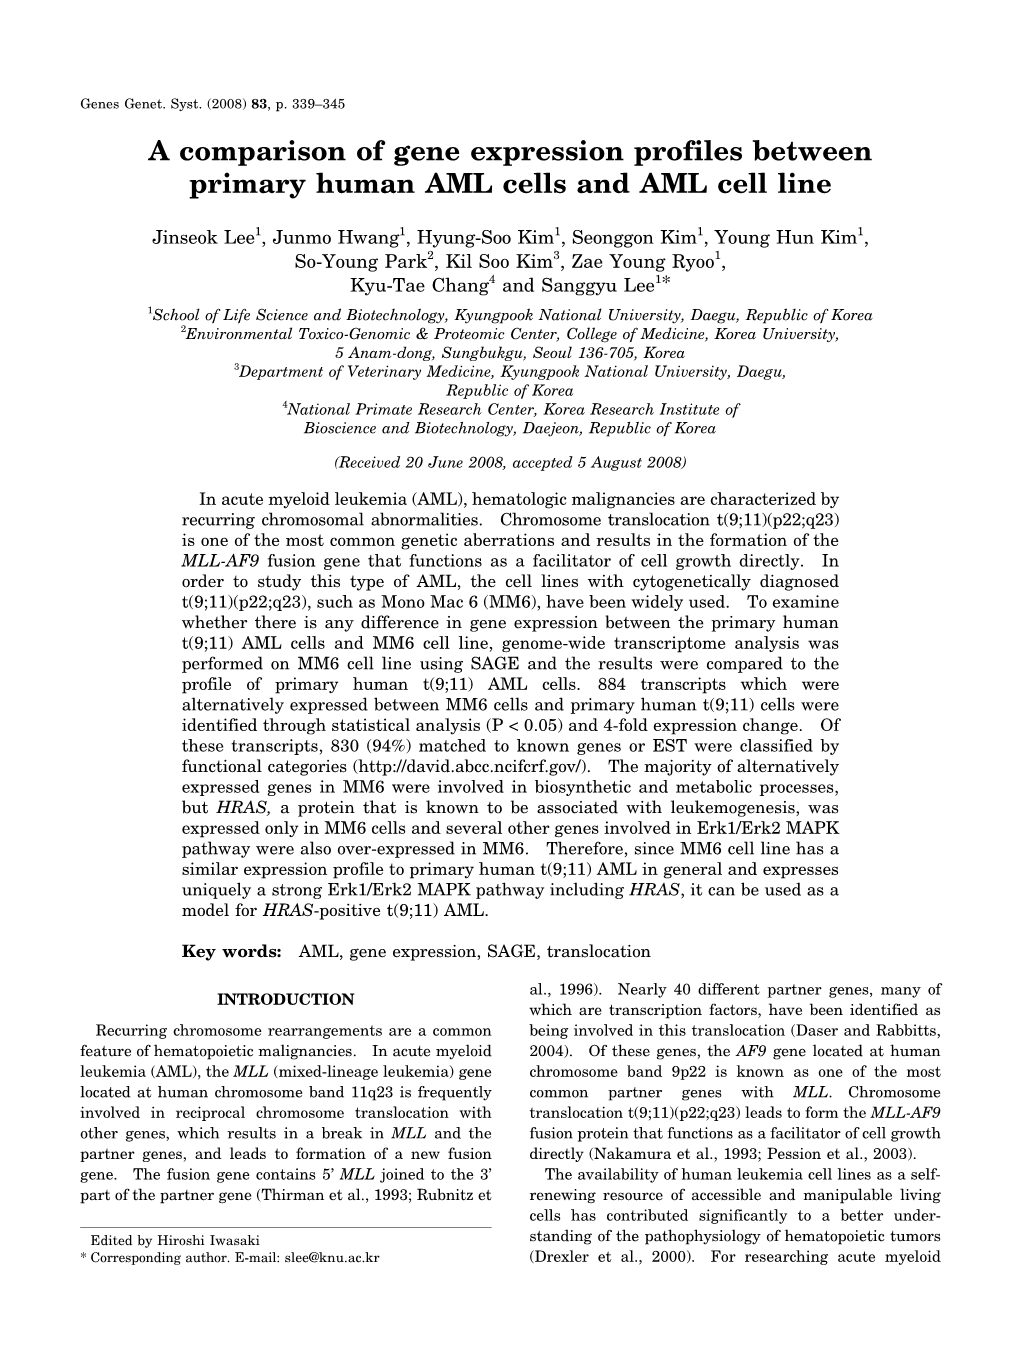 A Comparison of Gene Expression Profiles Between Primary Human AML Cells and AML Cell Line